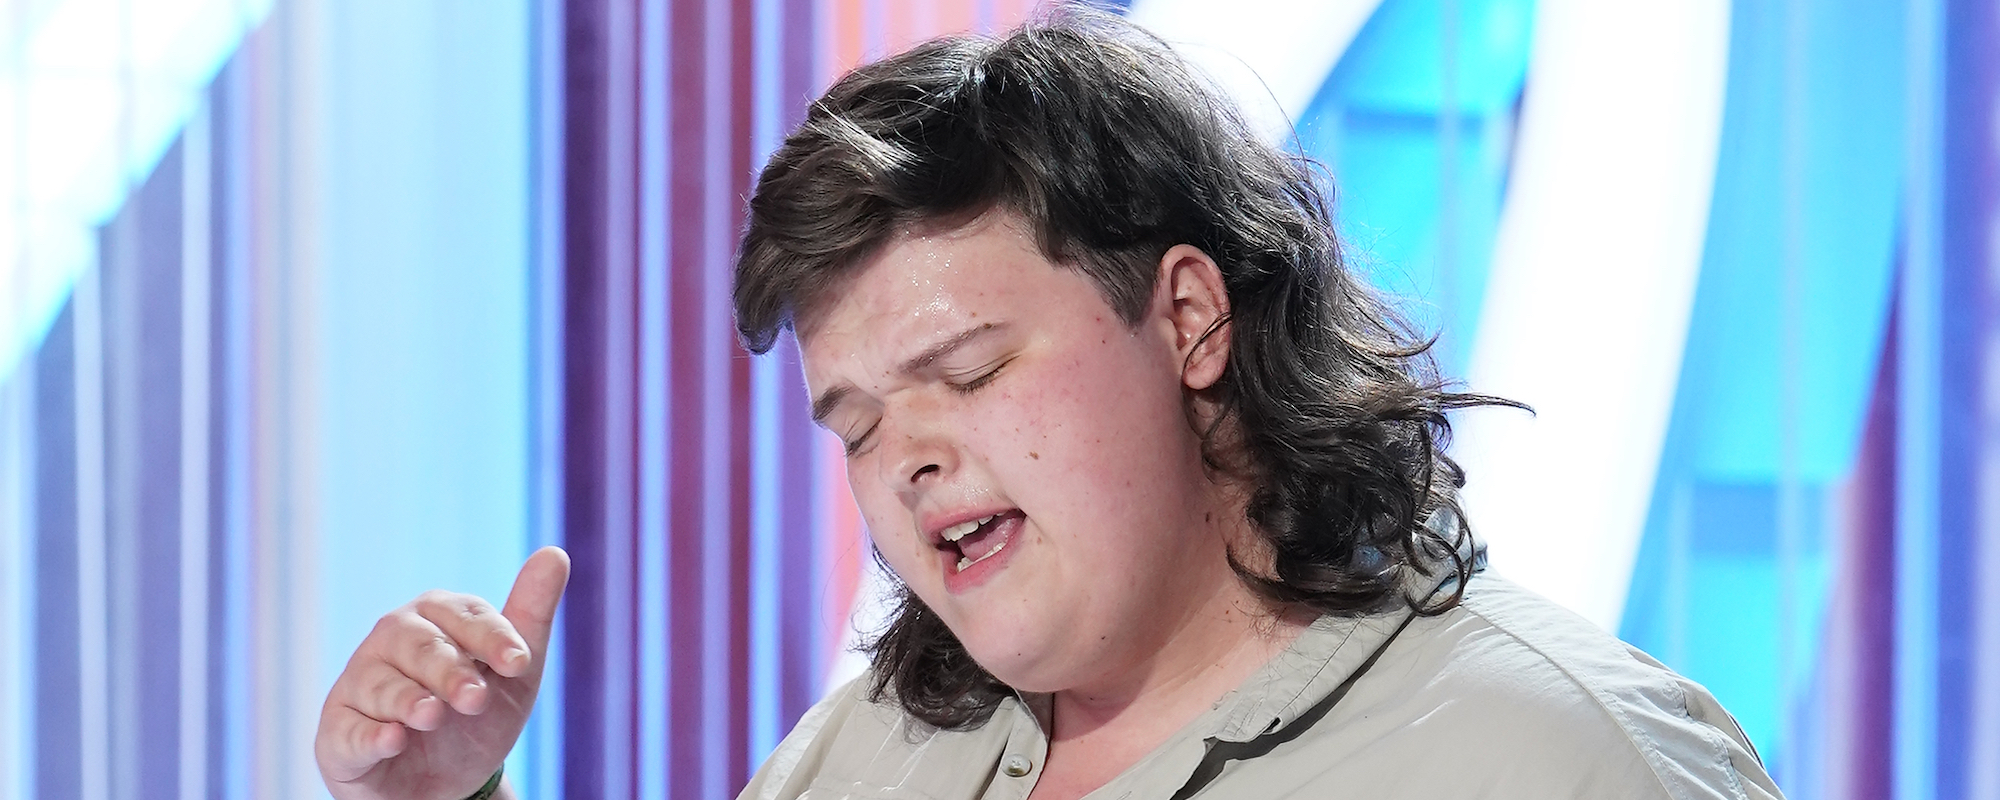 School Shooting Survivor Trey Louis Stuns ‘American Idol’ Judges with Moving Audition